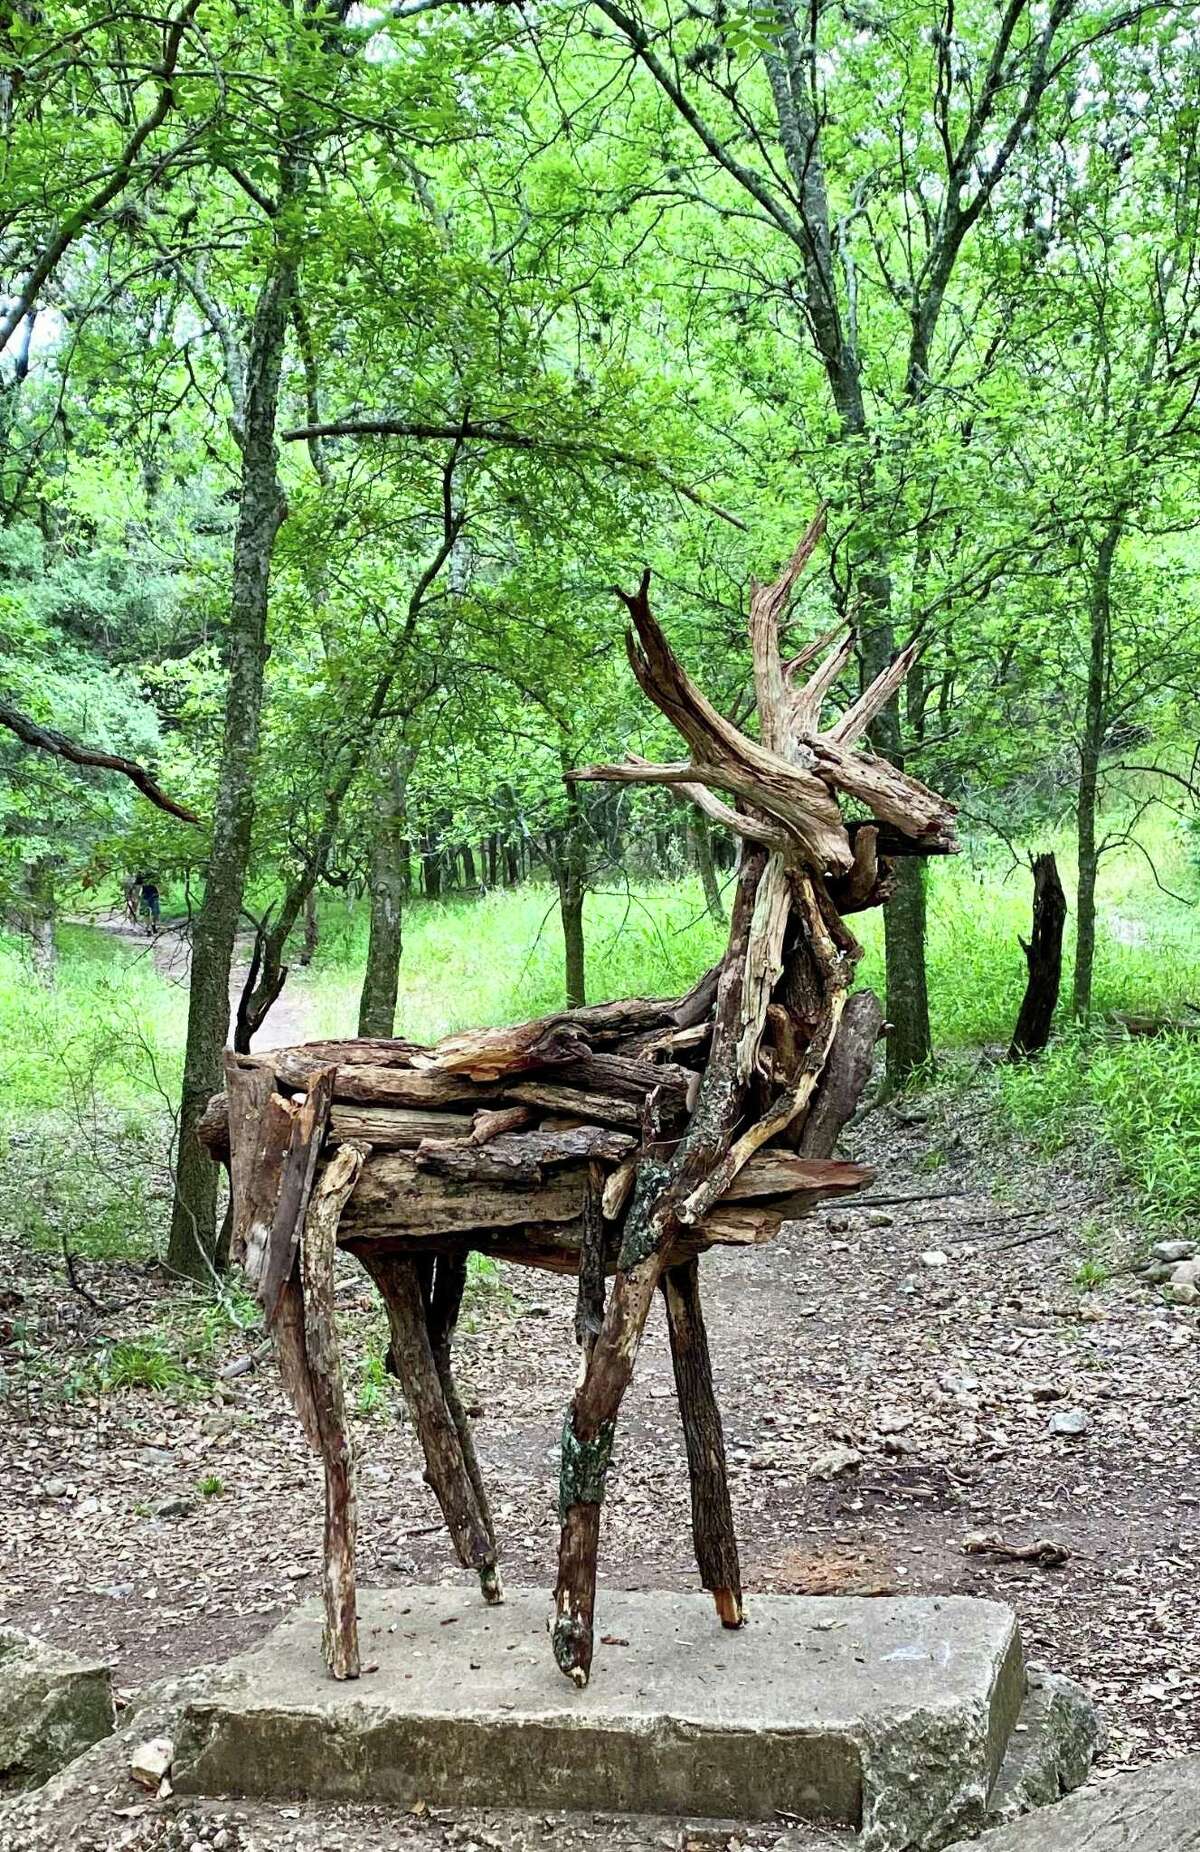 A photo of a since-destroyed sculpture created by 13-year-old artist Elizabeth Gutierrez shows a surprisingly delicate rendering of a deer crafted from scraps of deadwood she and her brother William collected in McAllister Park.